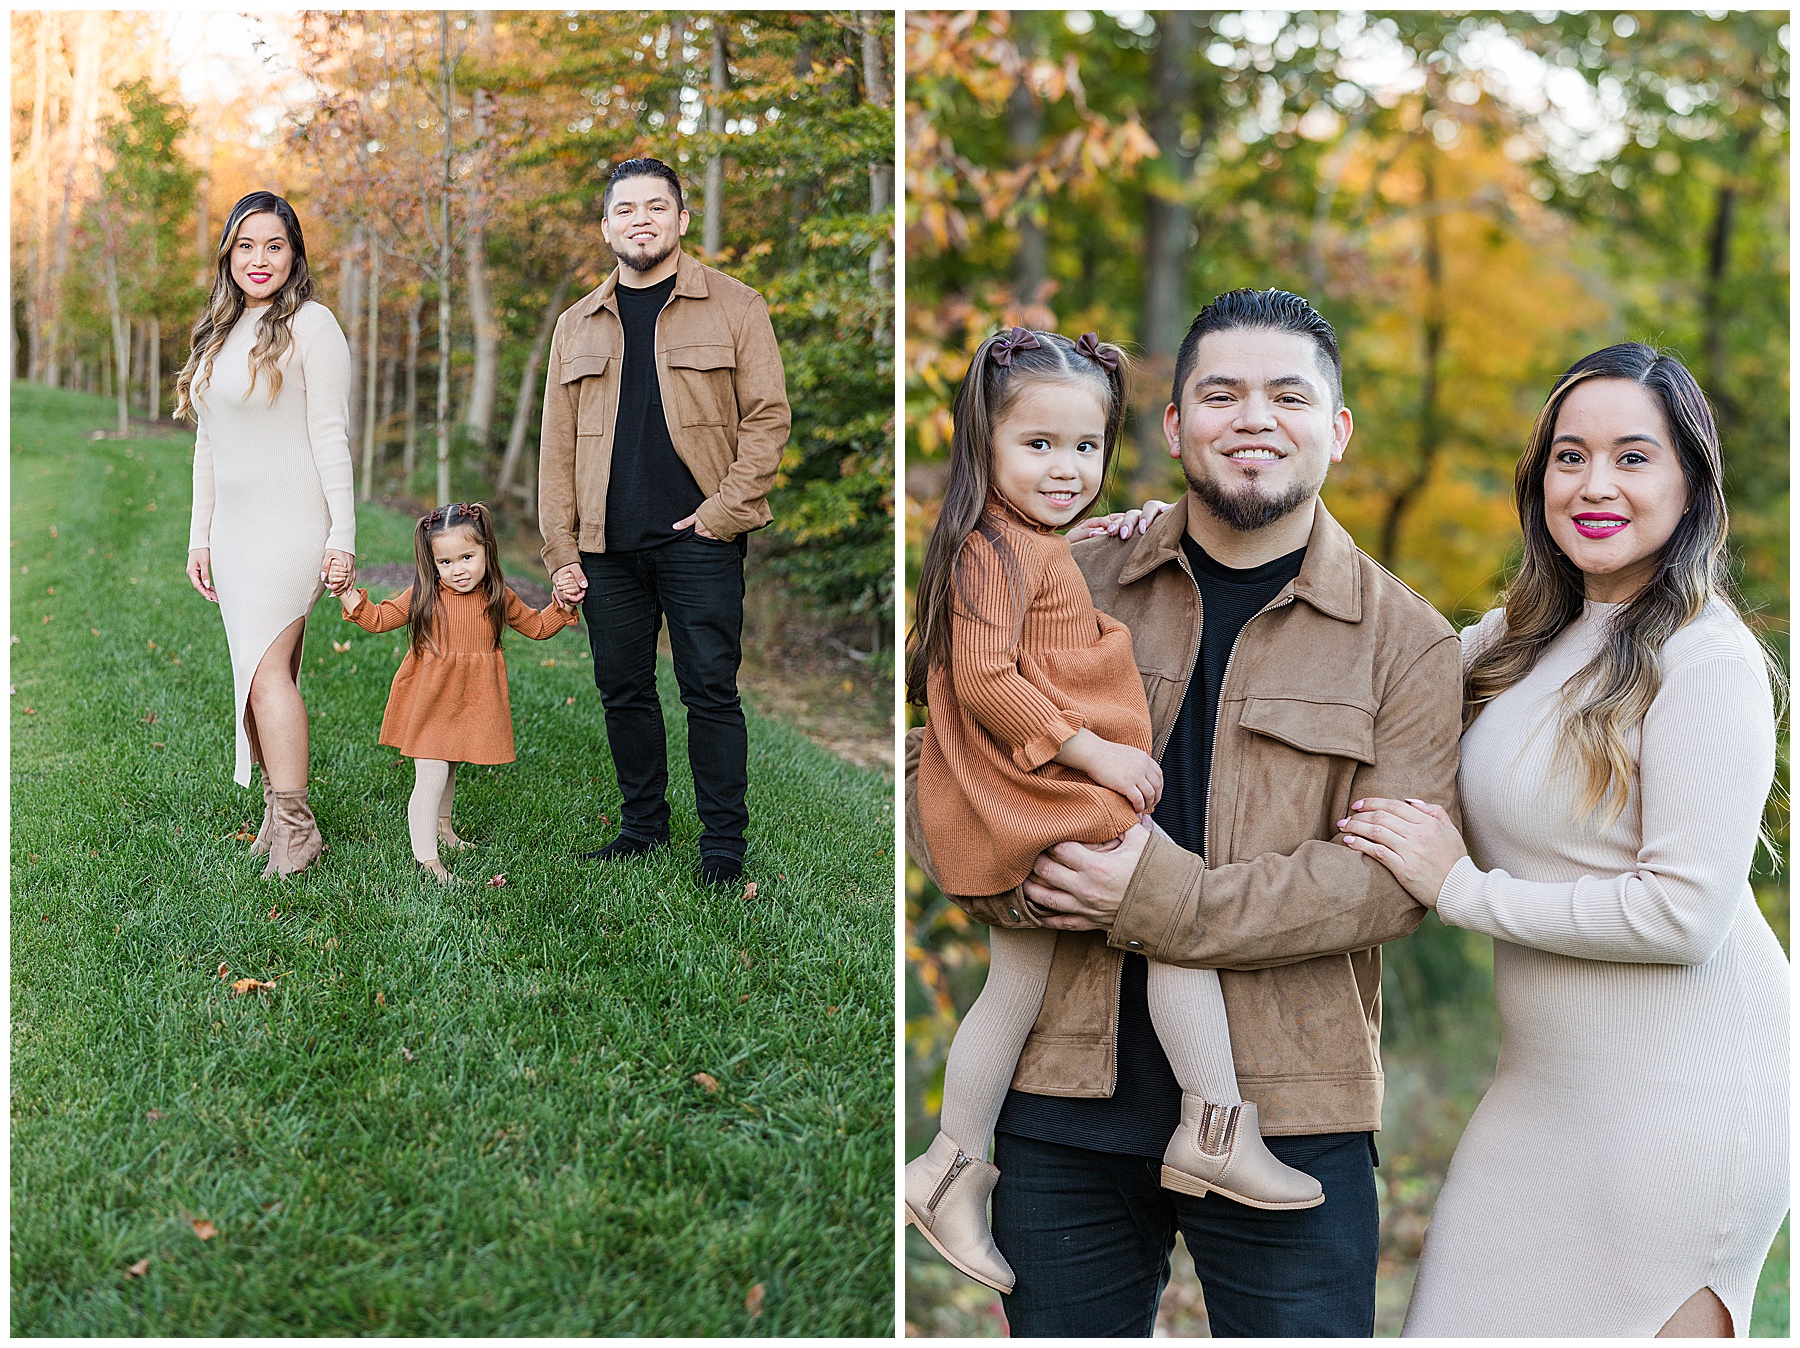 Family portraits in Anne Arundel County